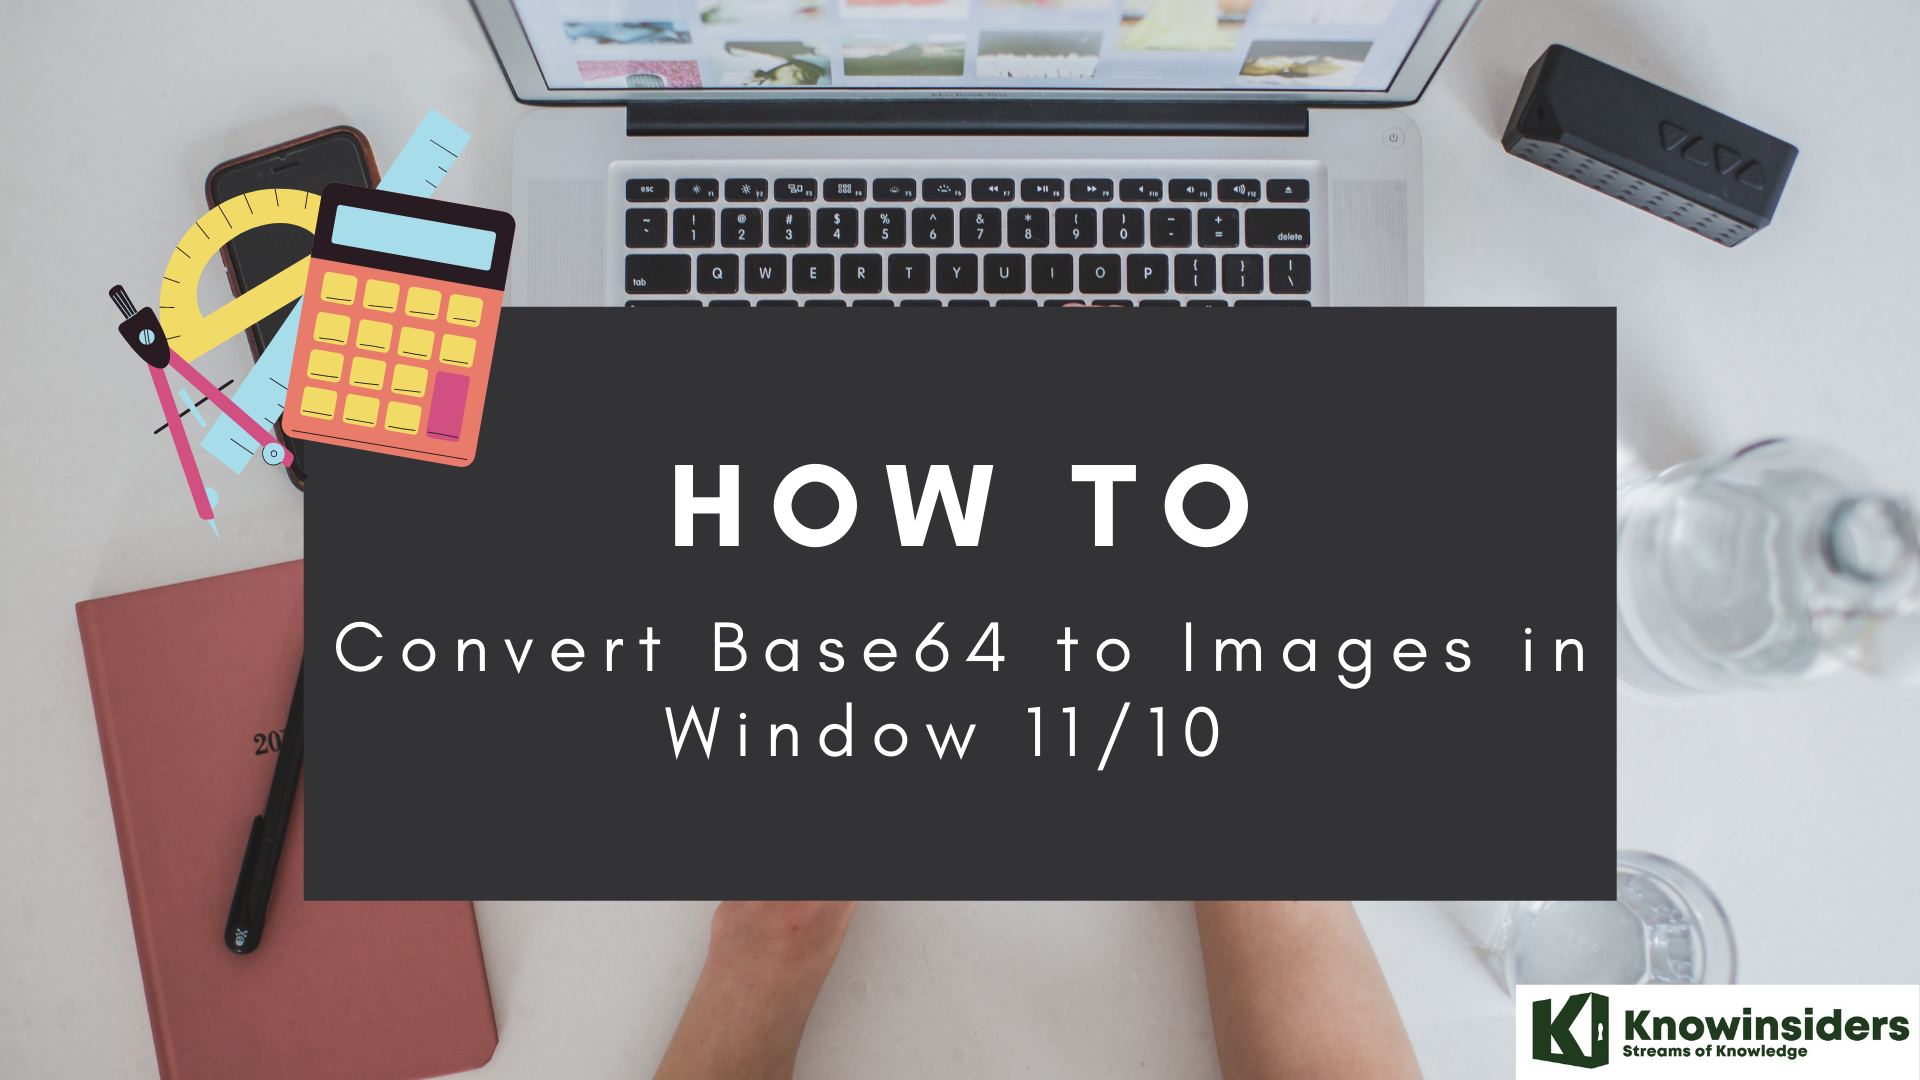 How To Convert Base64 to Image on Windows 11/10